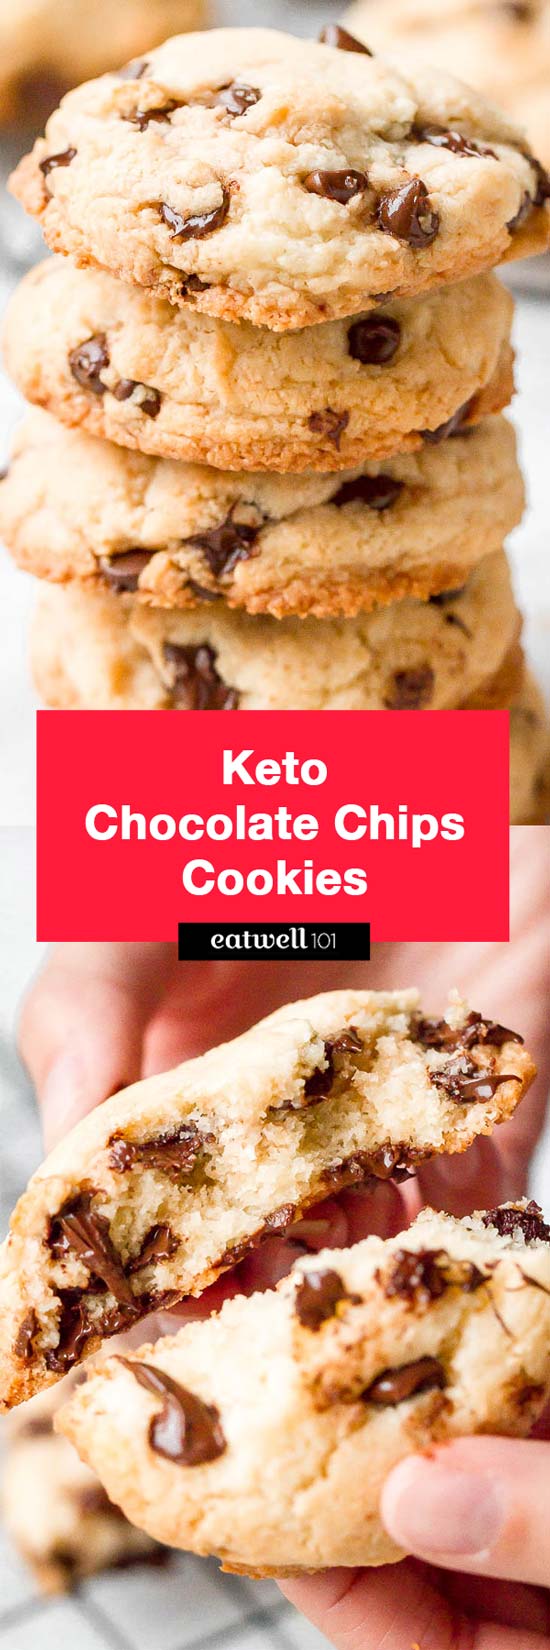 Keto chocolate chip cookies - These low carb cookies are a perfect recipe to make for any occasion, they take only 15 minutes or less, and the dream comes true!